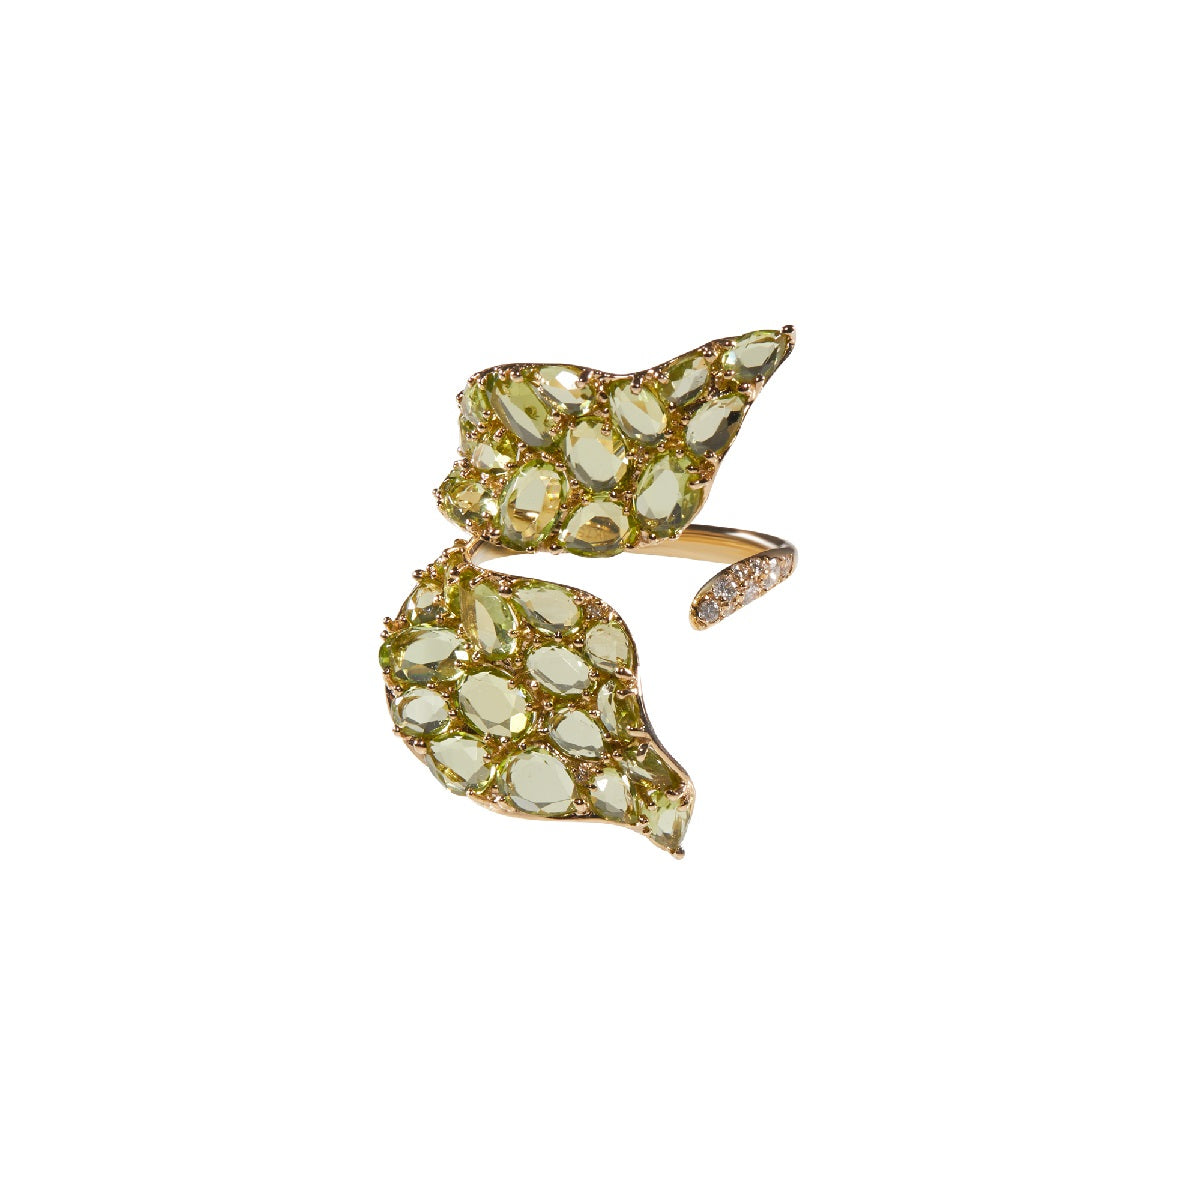 Peridot Ring from Petals Collection